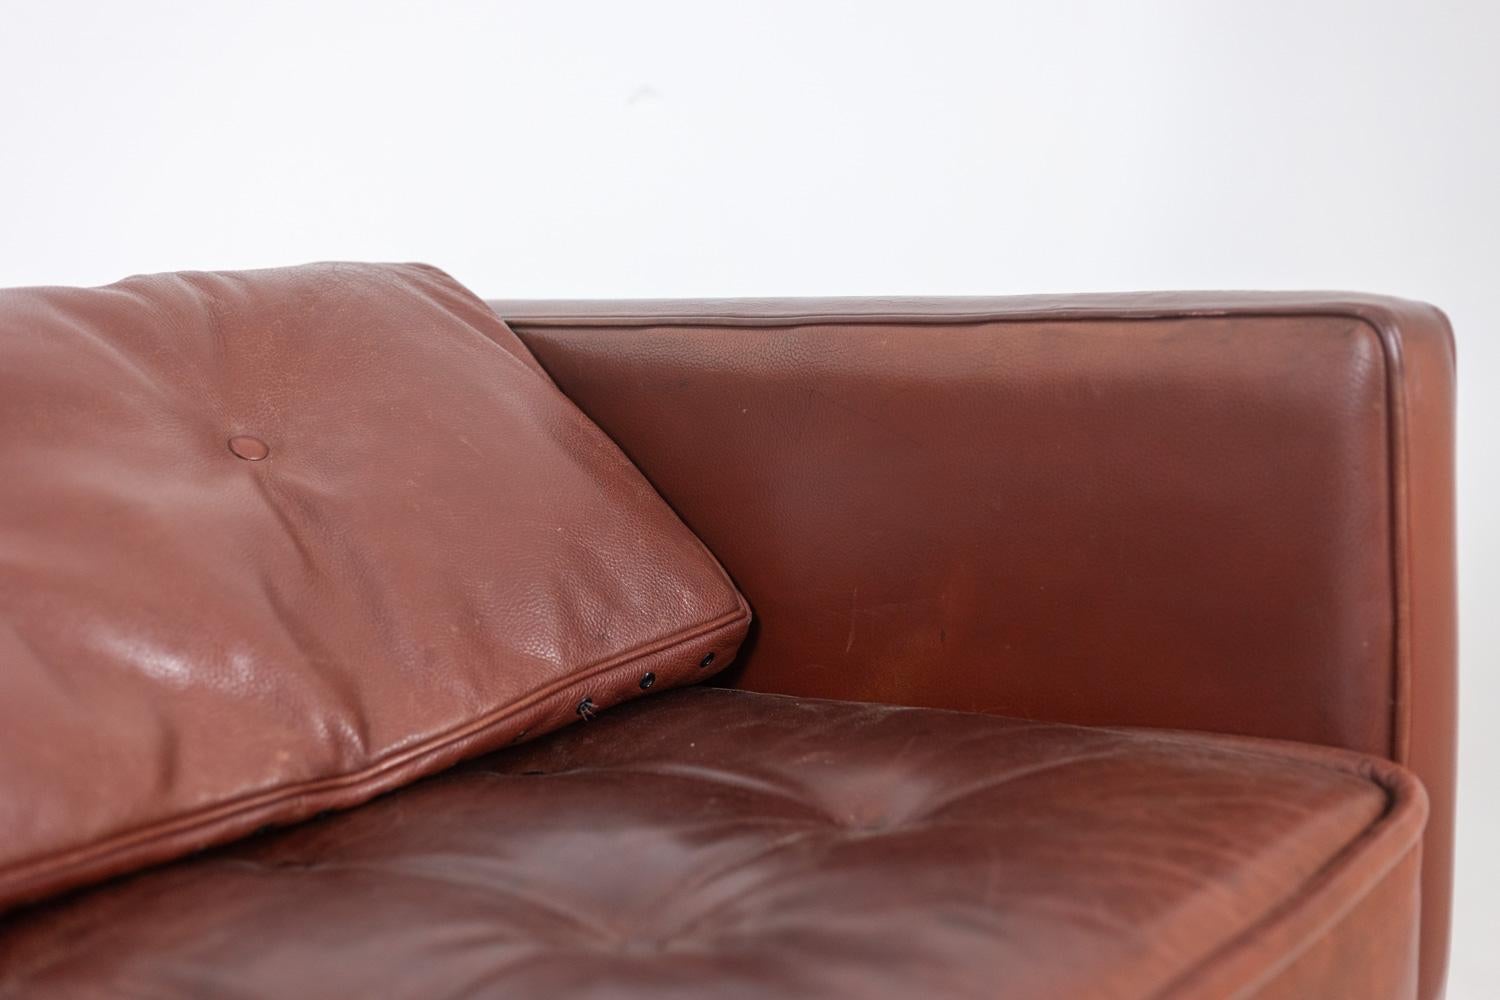 Christian Duc, par.

3-seater leather sofa, “Orwell” model, chocolate color and rectangular shape, composed of a large padded seat with two padded cushions to place on the back or on the armrests. Black lacquered metal base ending in a